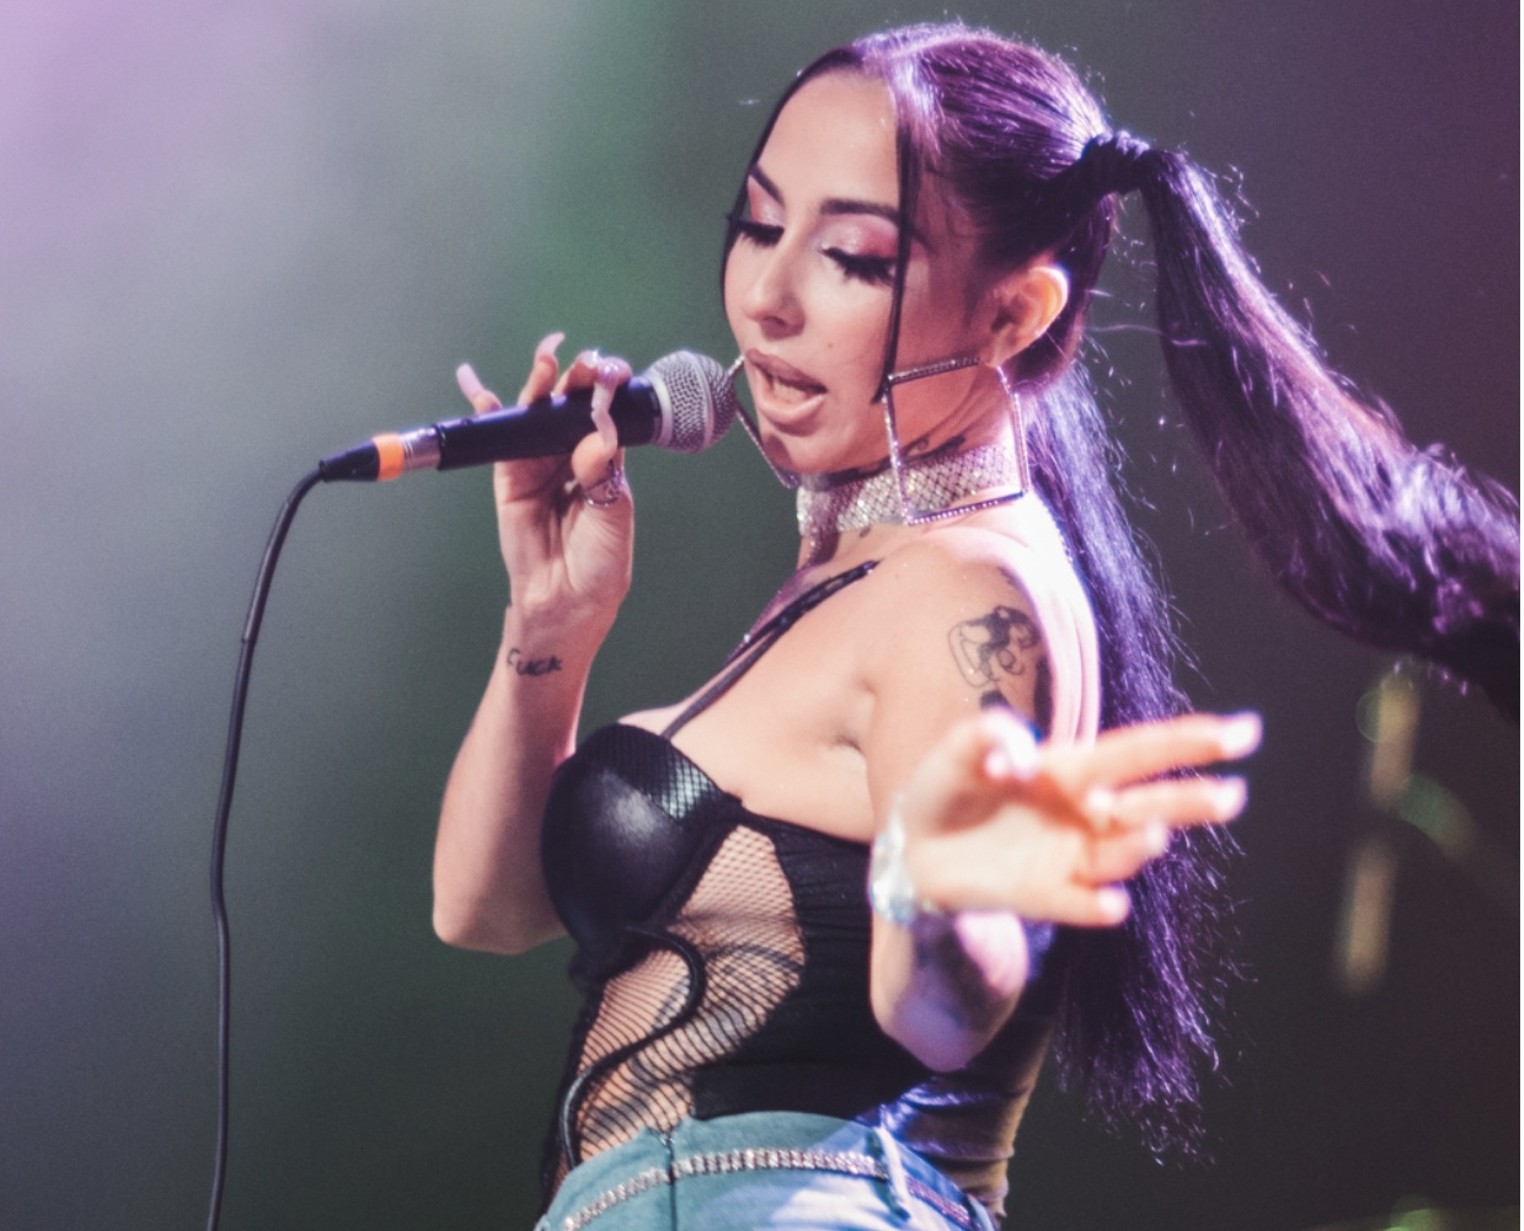 La Goony Chonga is one of many women taking over the hip-hop scene in 2019....